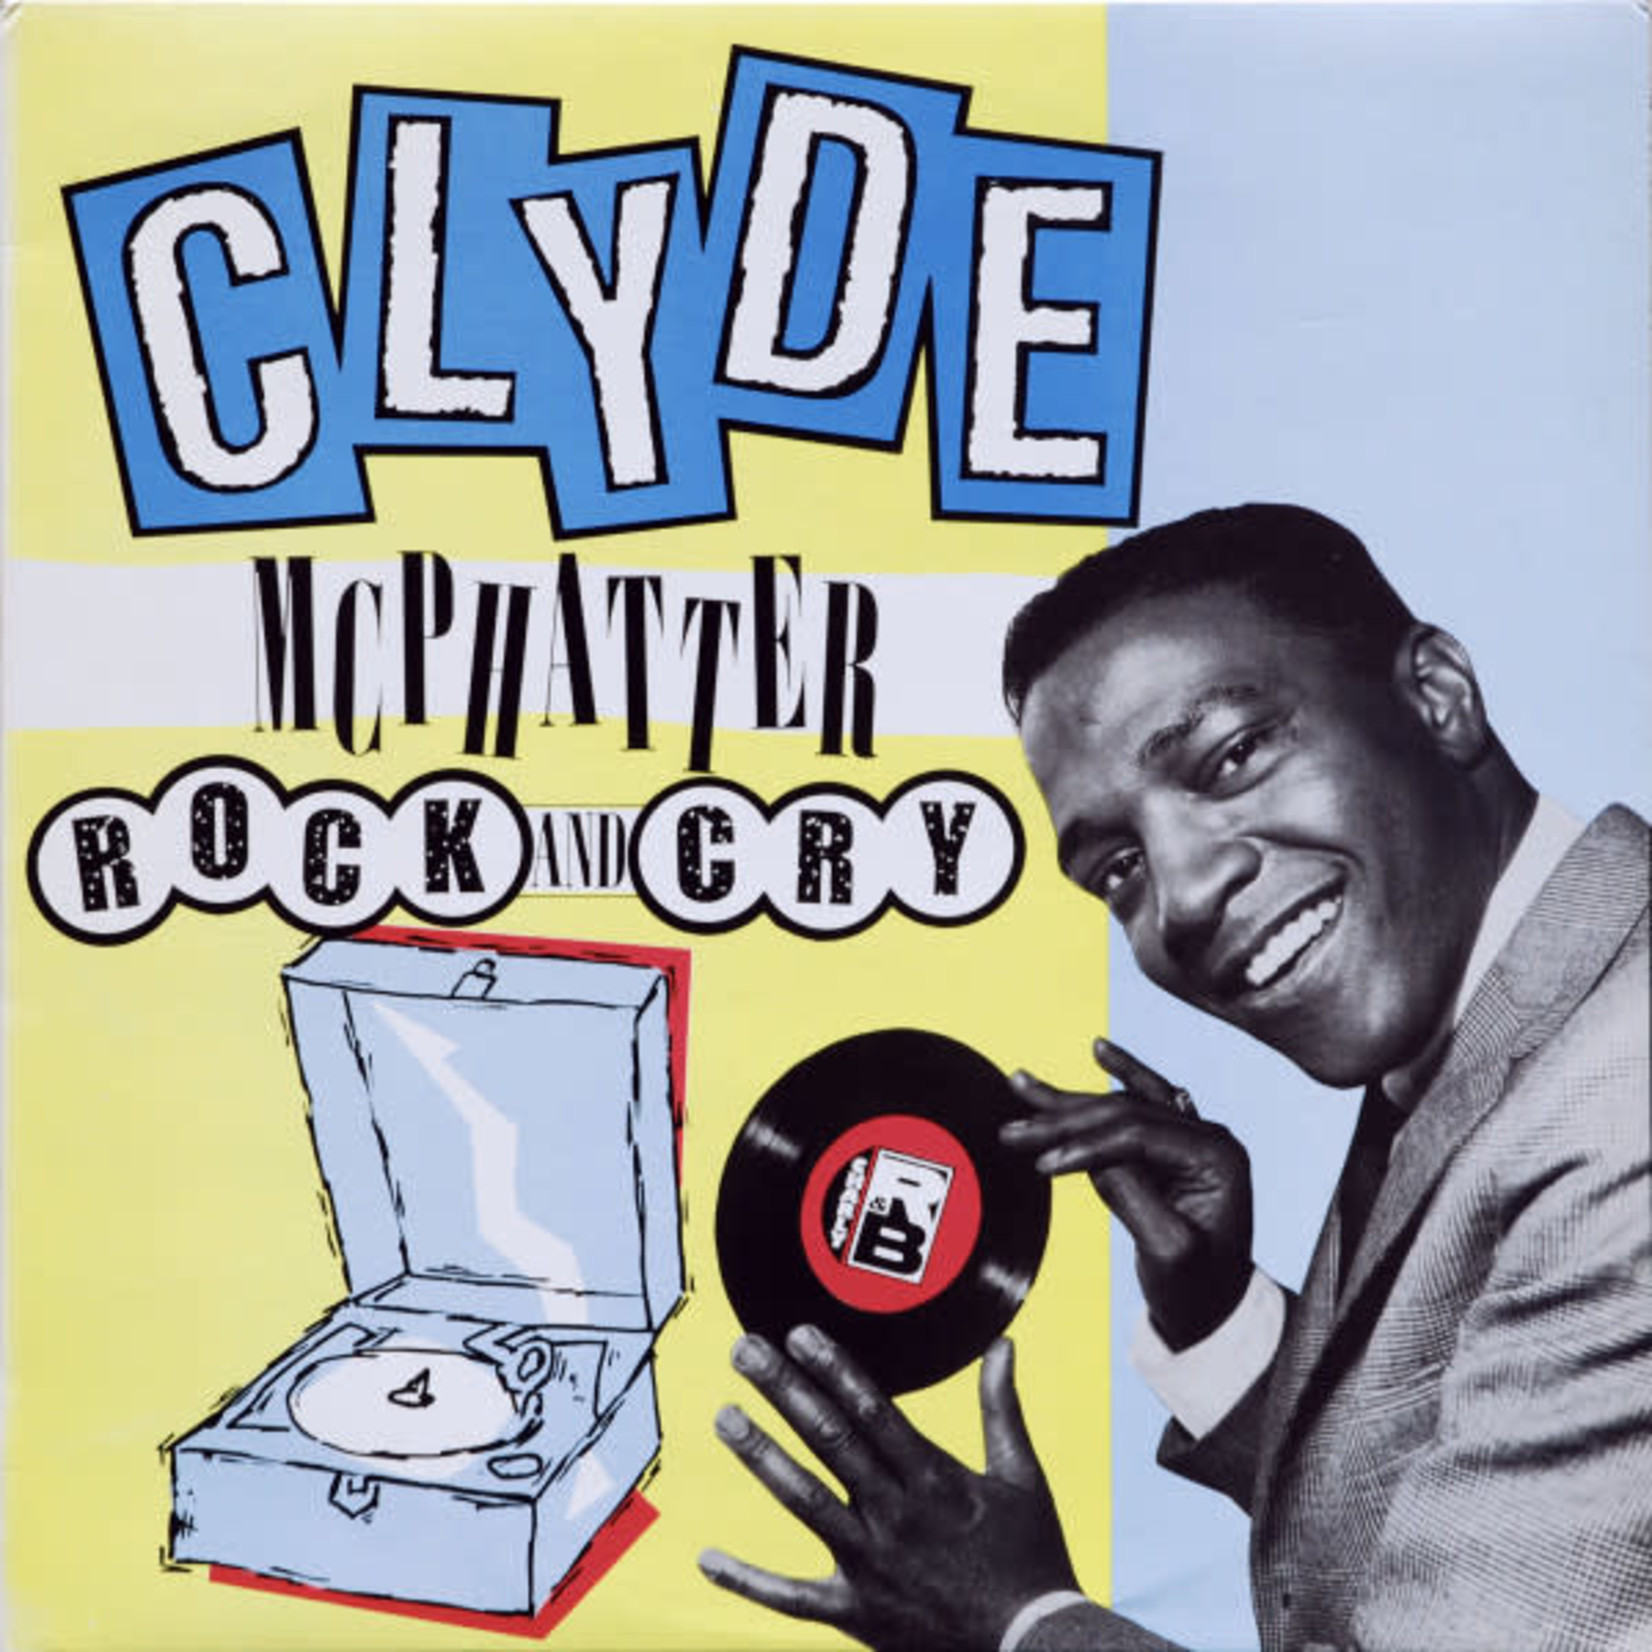 [Vintage] Clyde Mcphatter - Rock and Cry